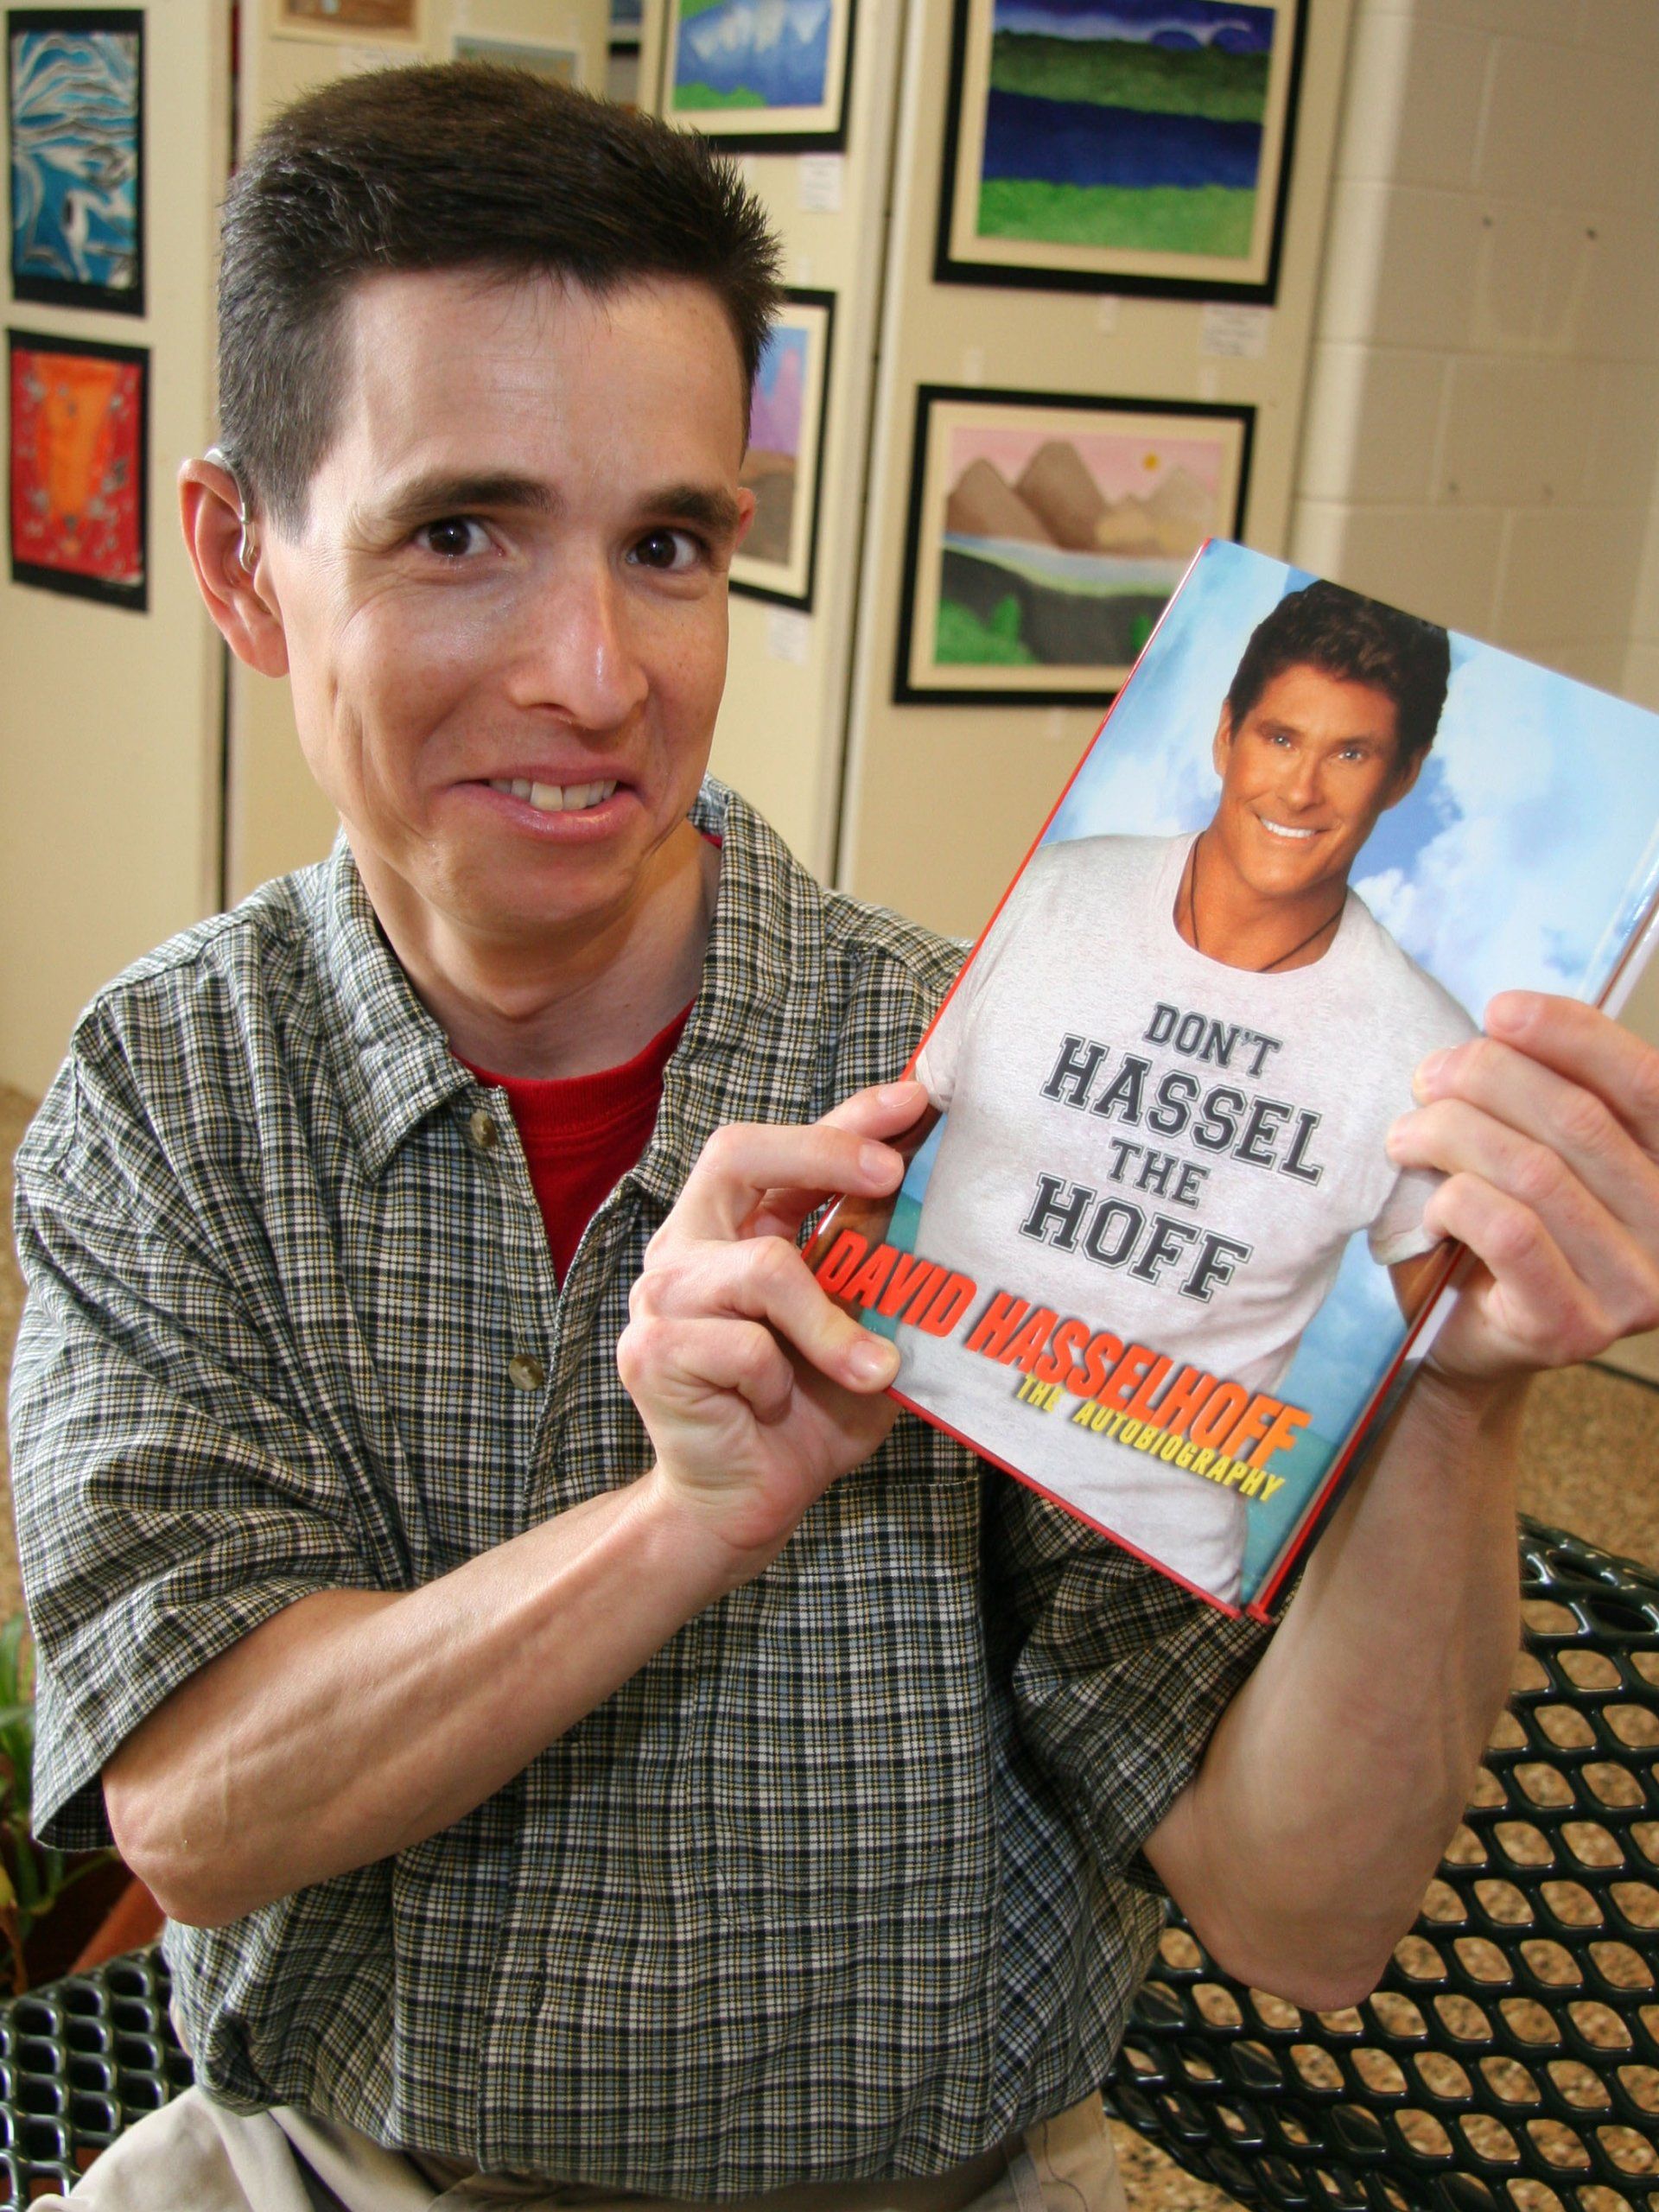 Paul published in David Hasselhoff's autobiography